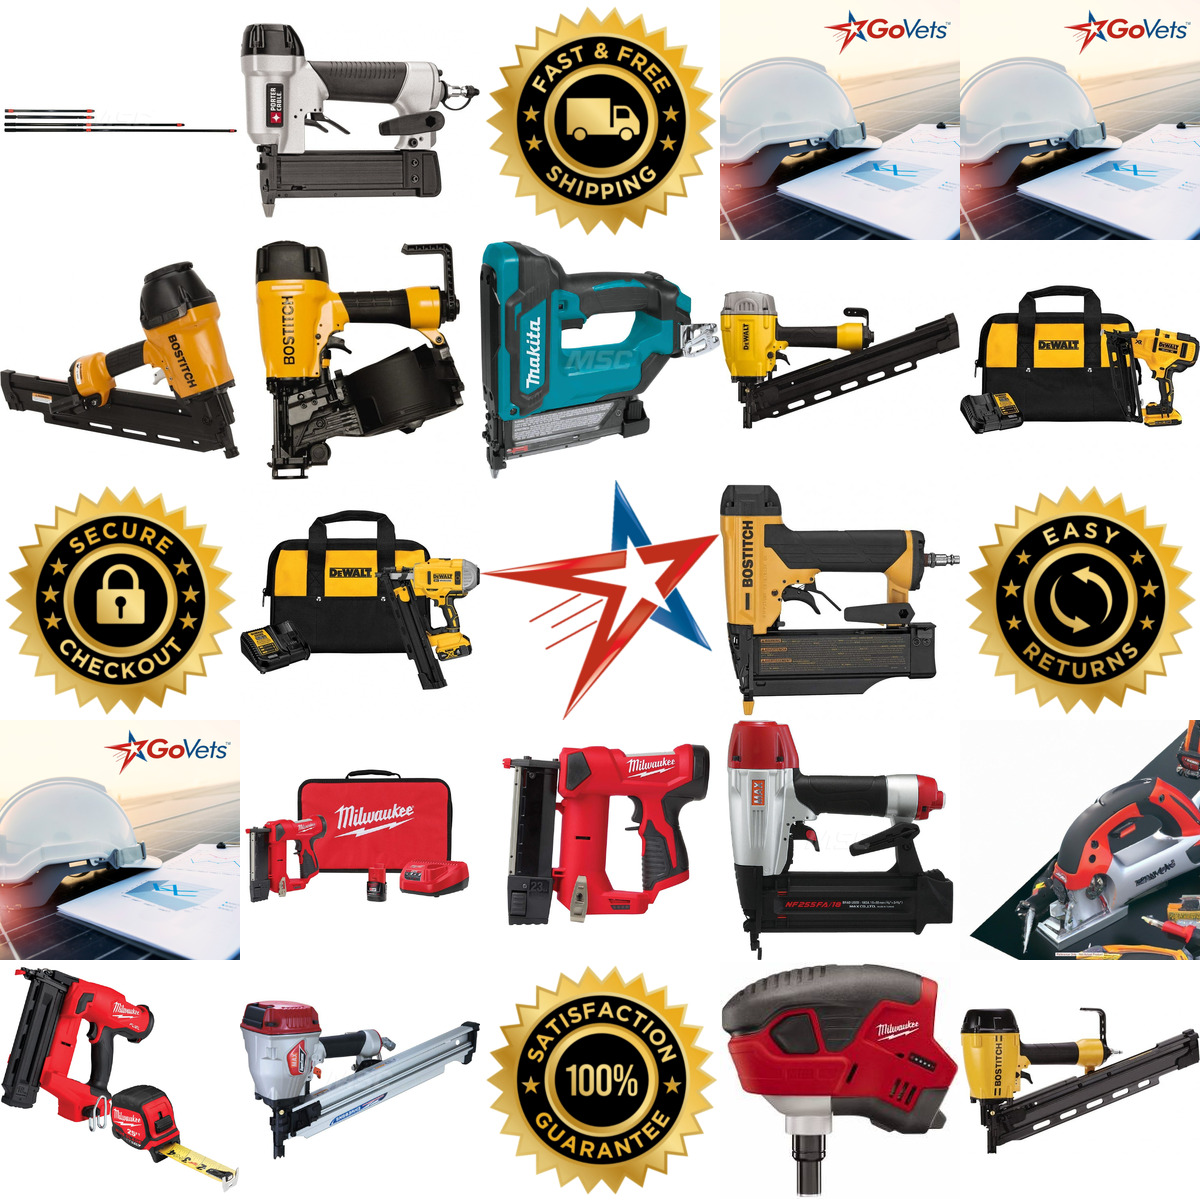 A selection of Power Nailers products on GoVets